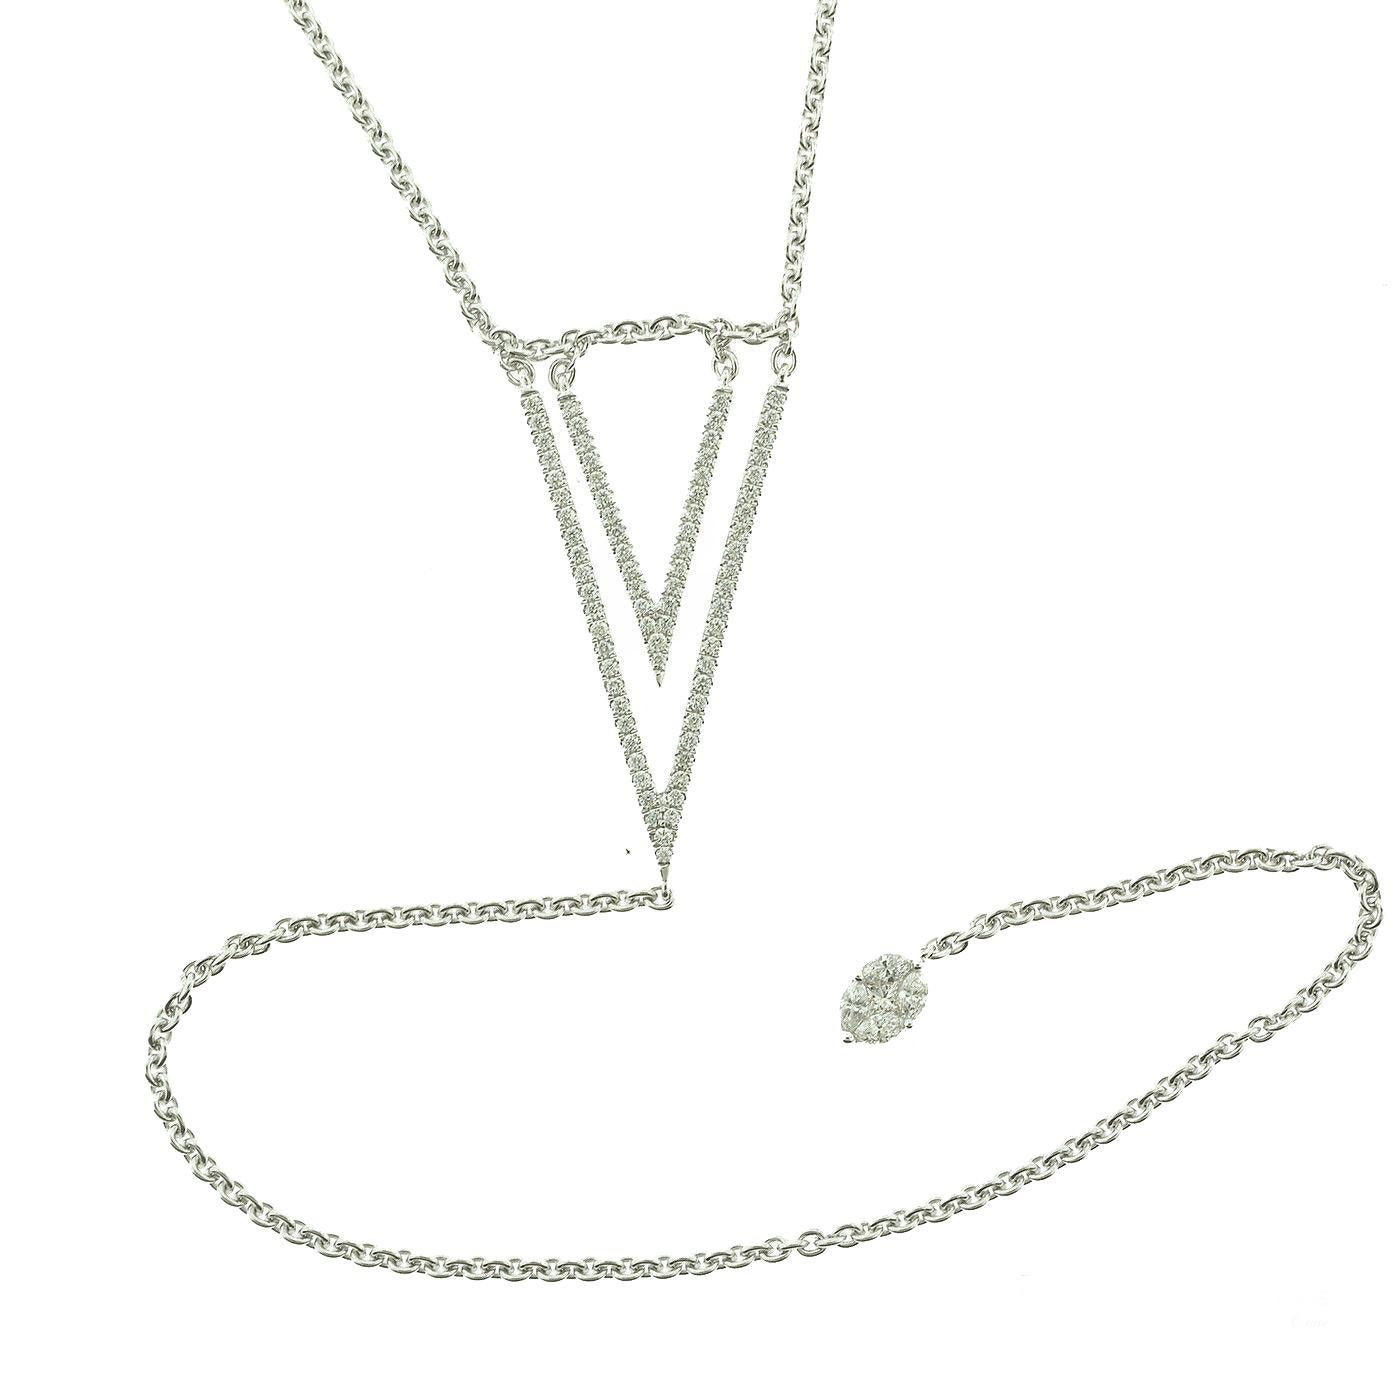 Women's or Men's Diamond and White Gold Double Triangle Long Chain Drop Necklace